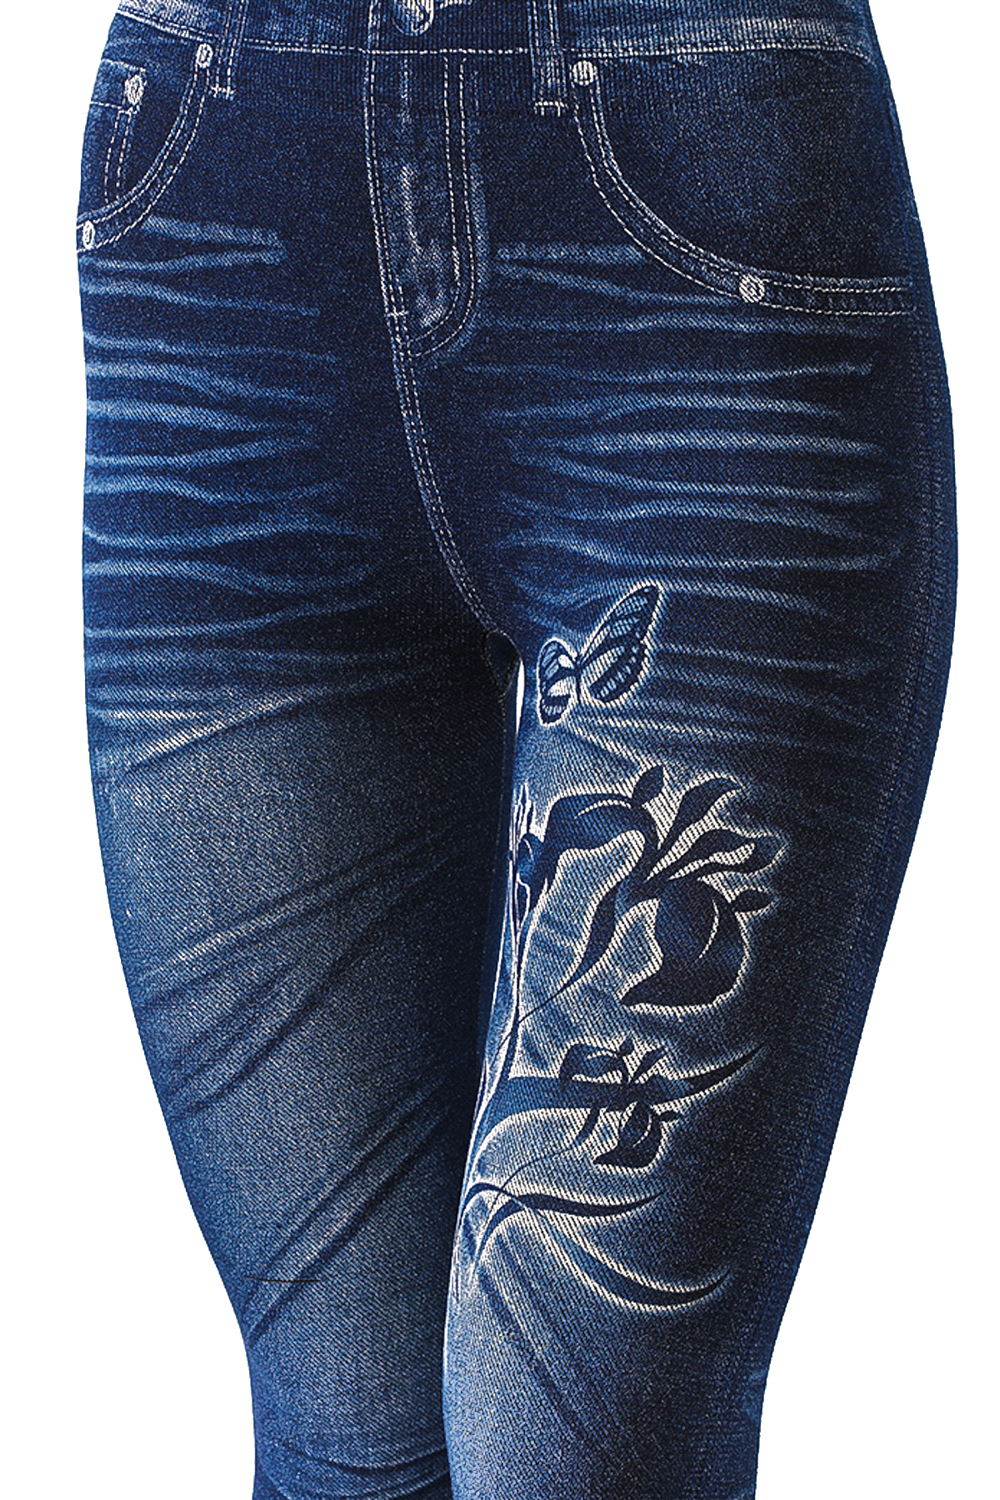 Denim Leggings with Butterfly and Floral Pattern